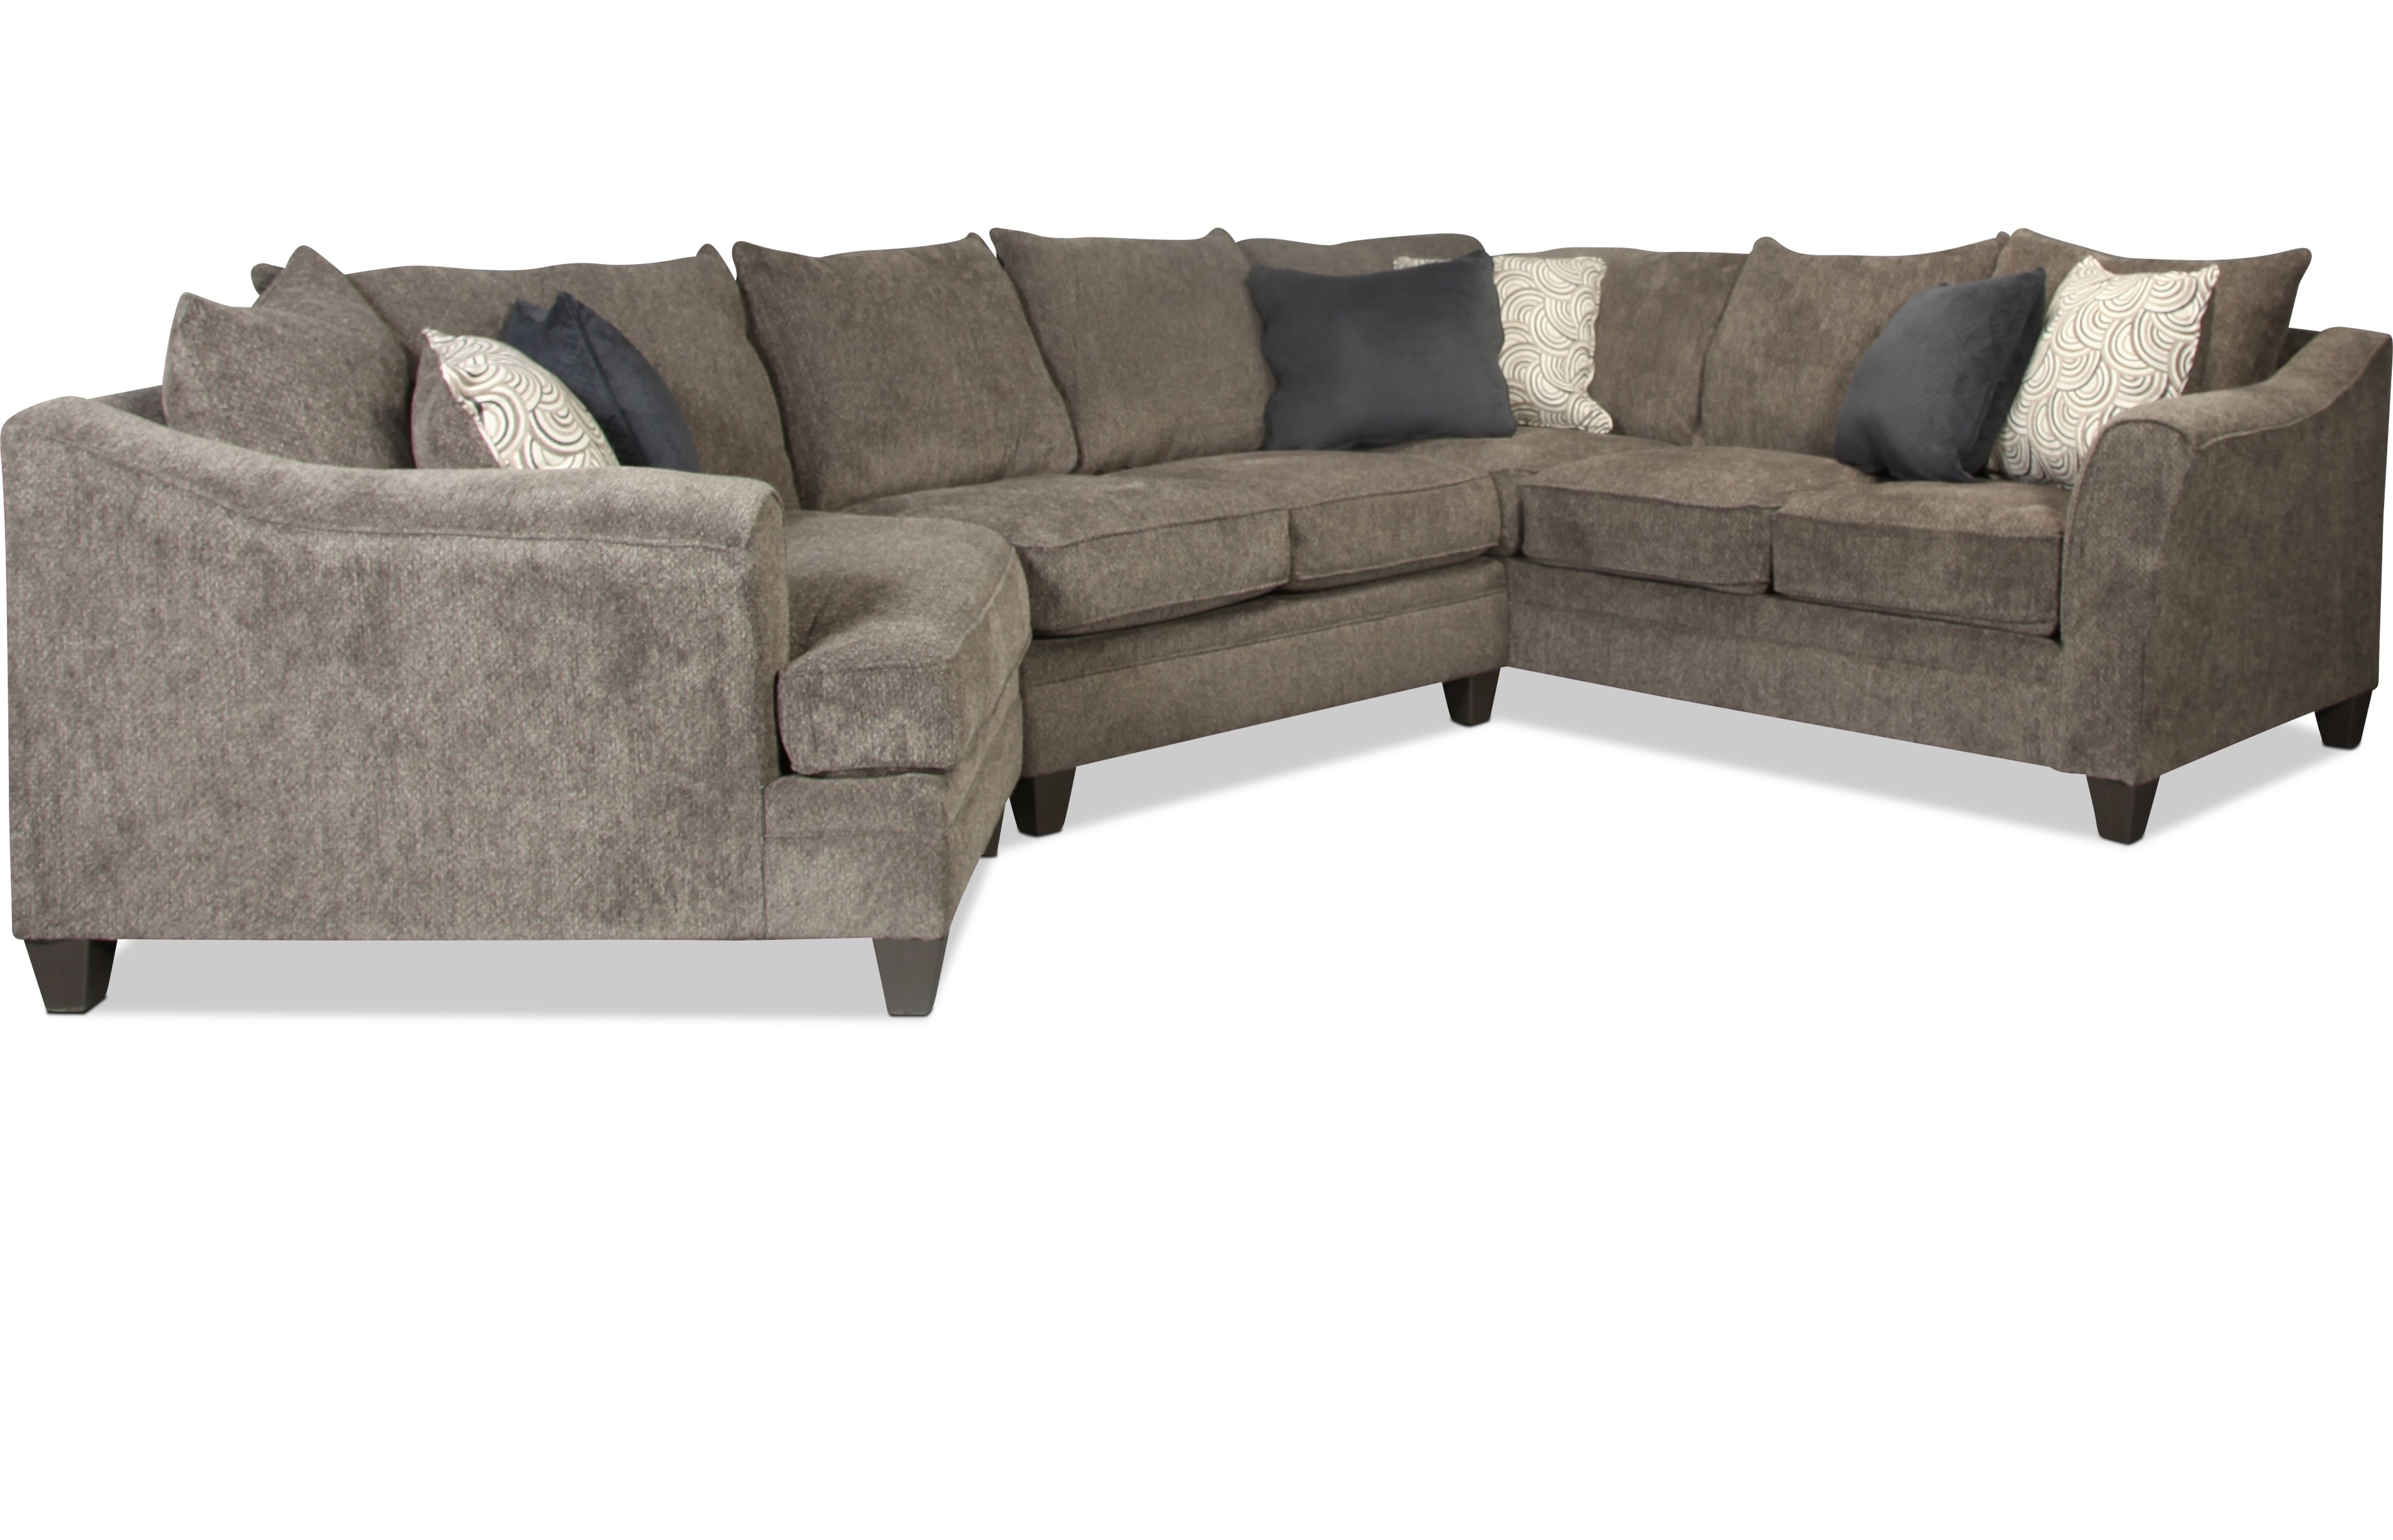 Sectionals | Levin Furniture Inside Josephine 2 Piece Sectionals With Raf Sofa (View 17 of 30)